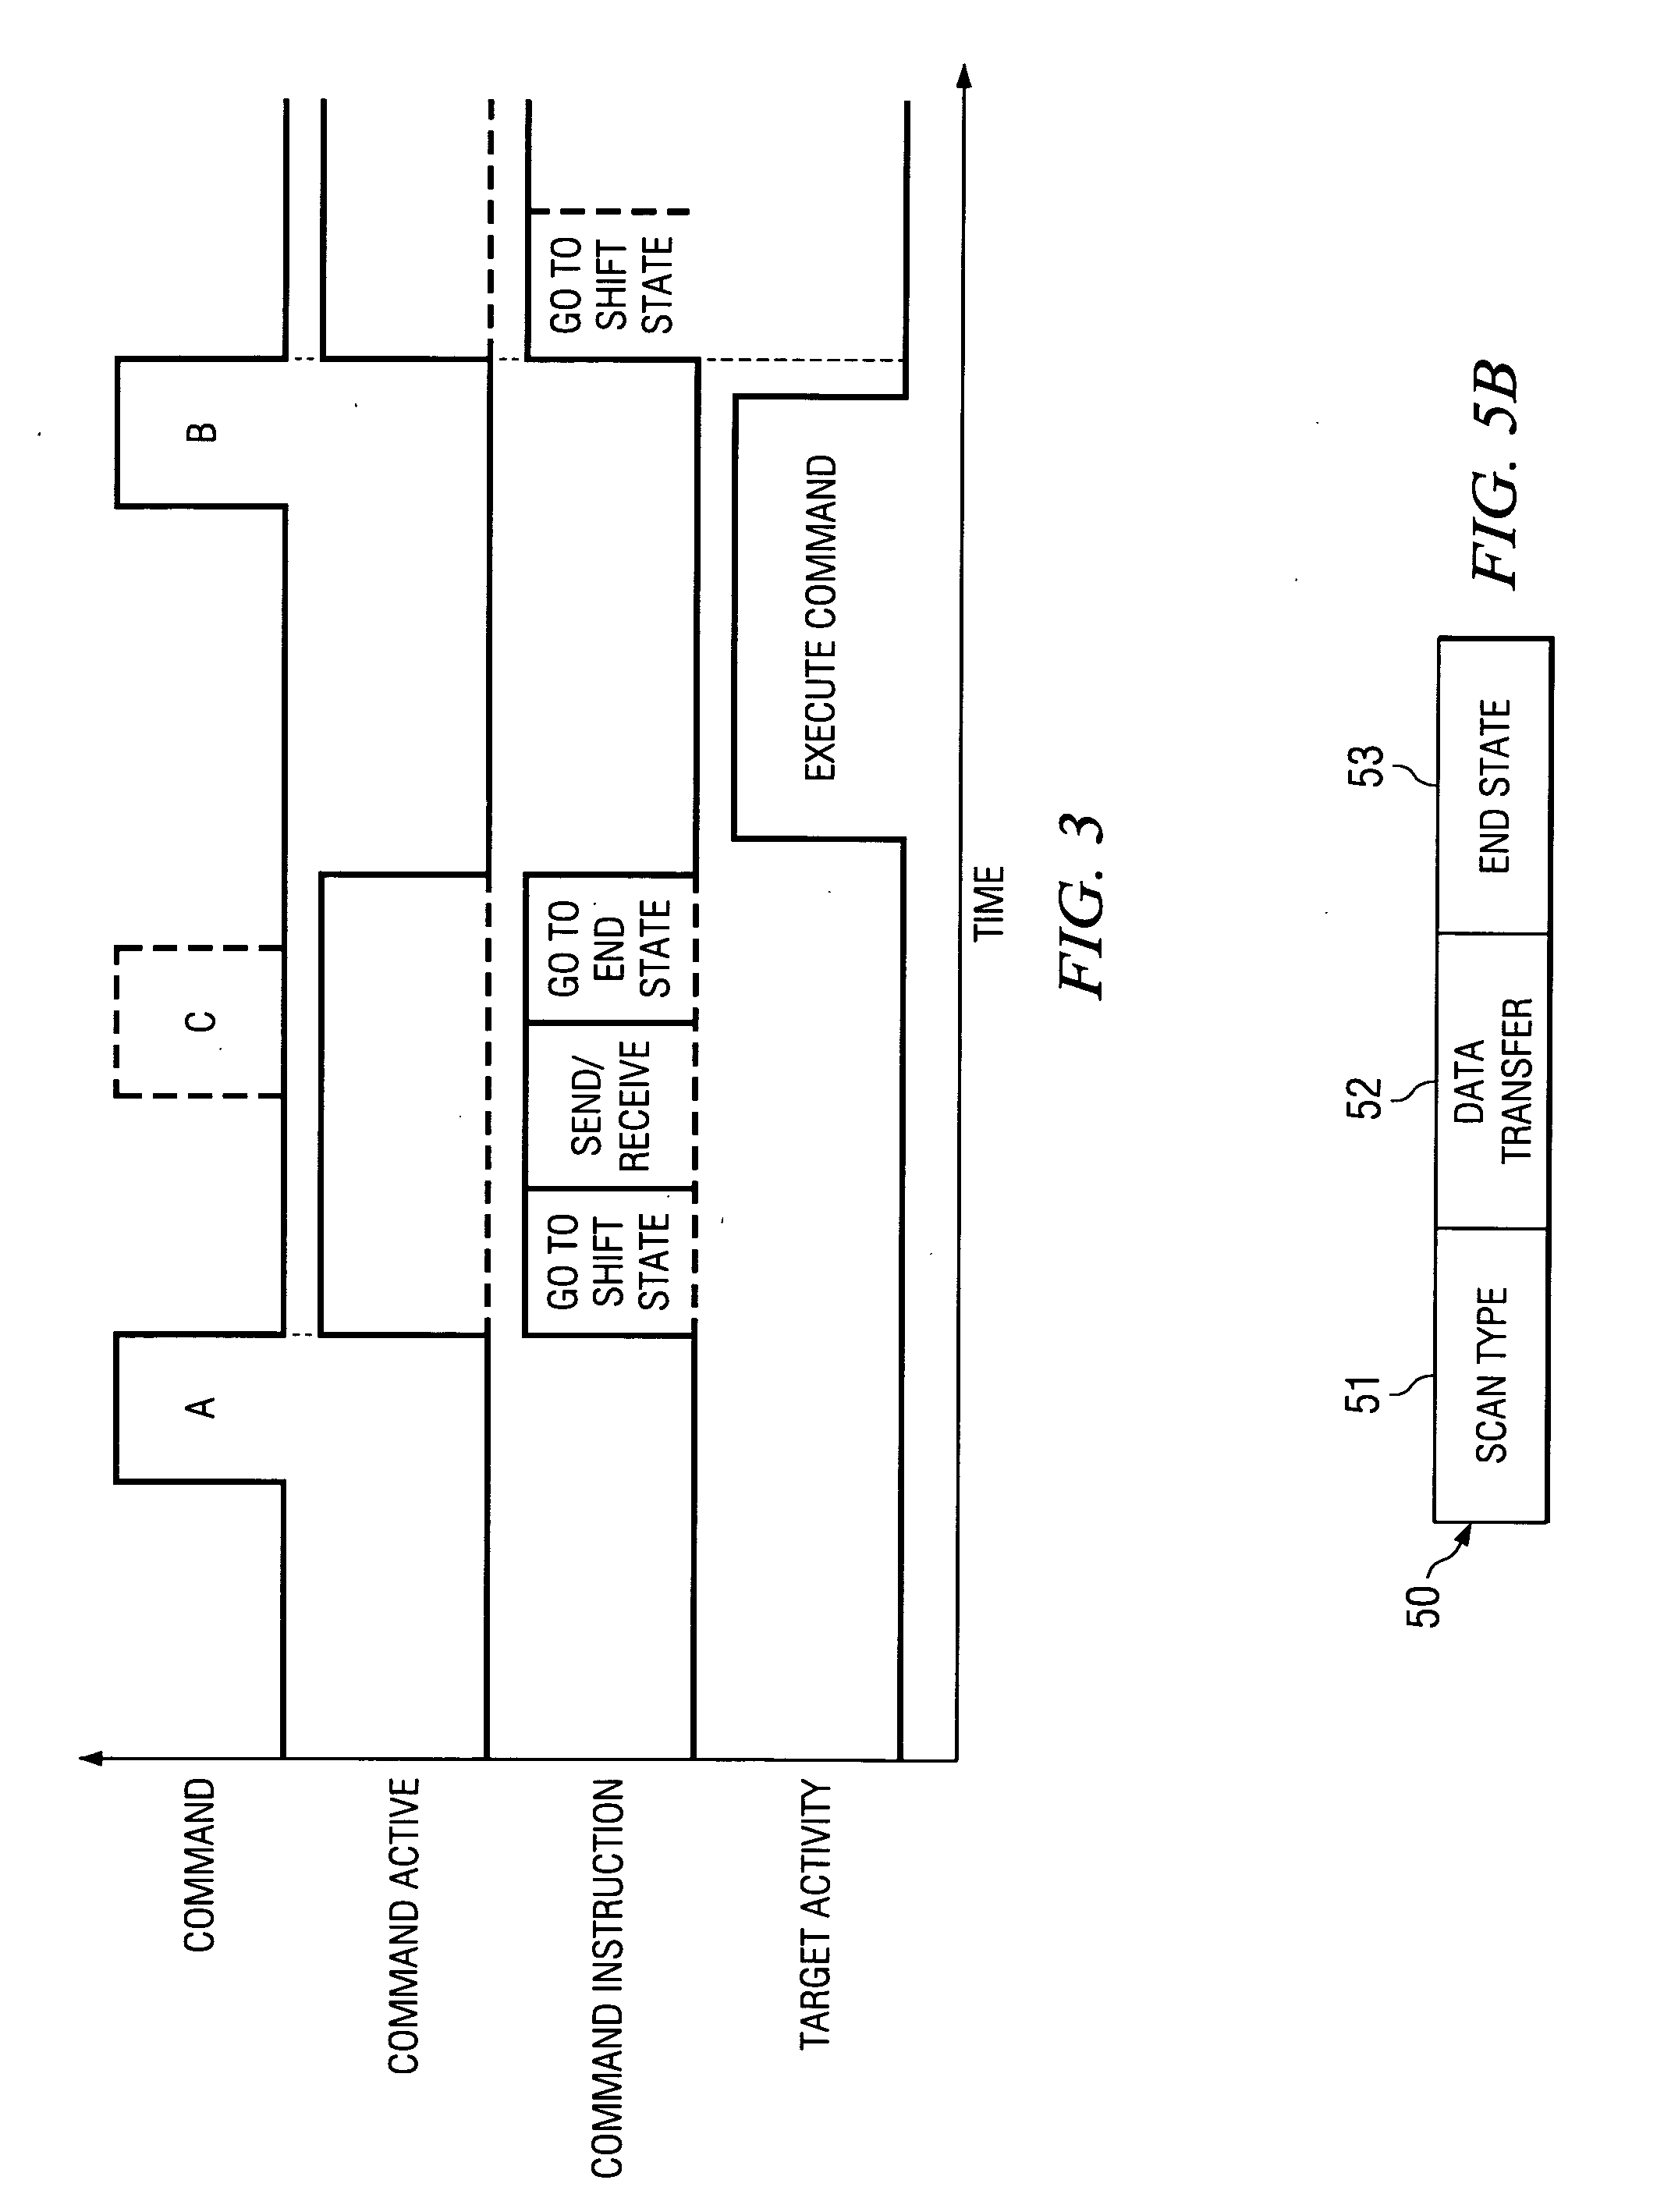 Apparatus and method for performing speculative reads from a scan control unit using FIFO buffer units